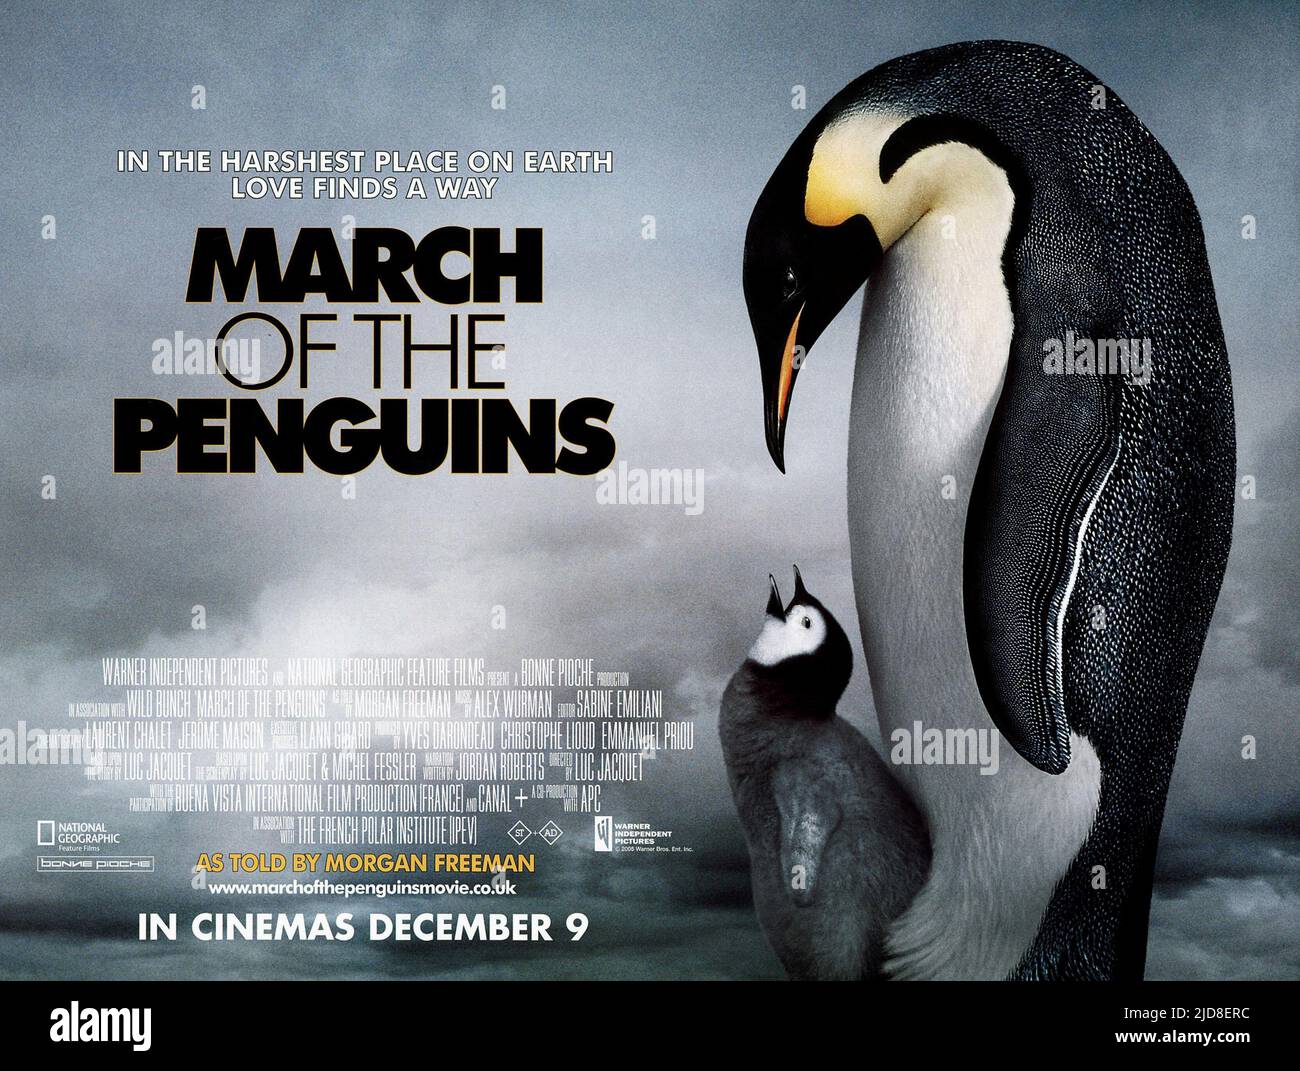 ANTARCTIC EMPEROR PENGUINS POSTER, MARCH OF THE PENGUINS, 2005, Stock Photo